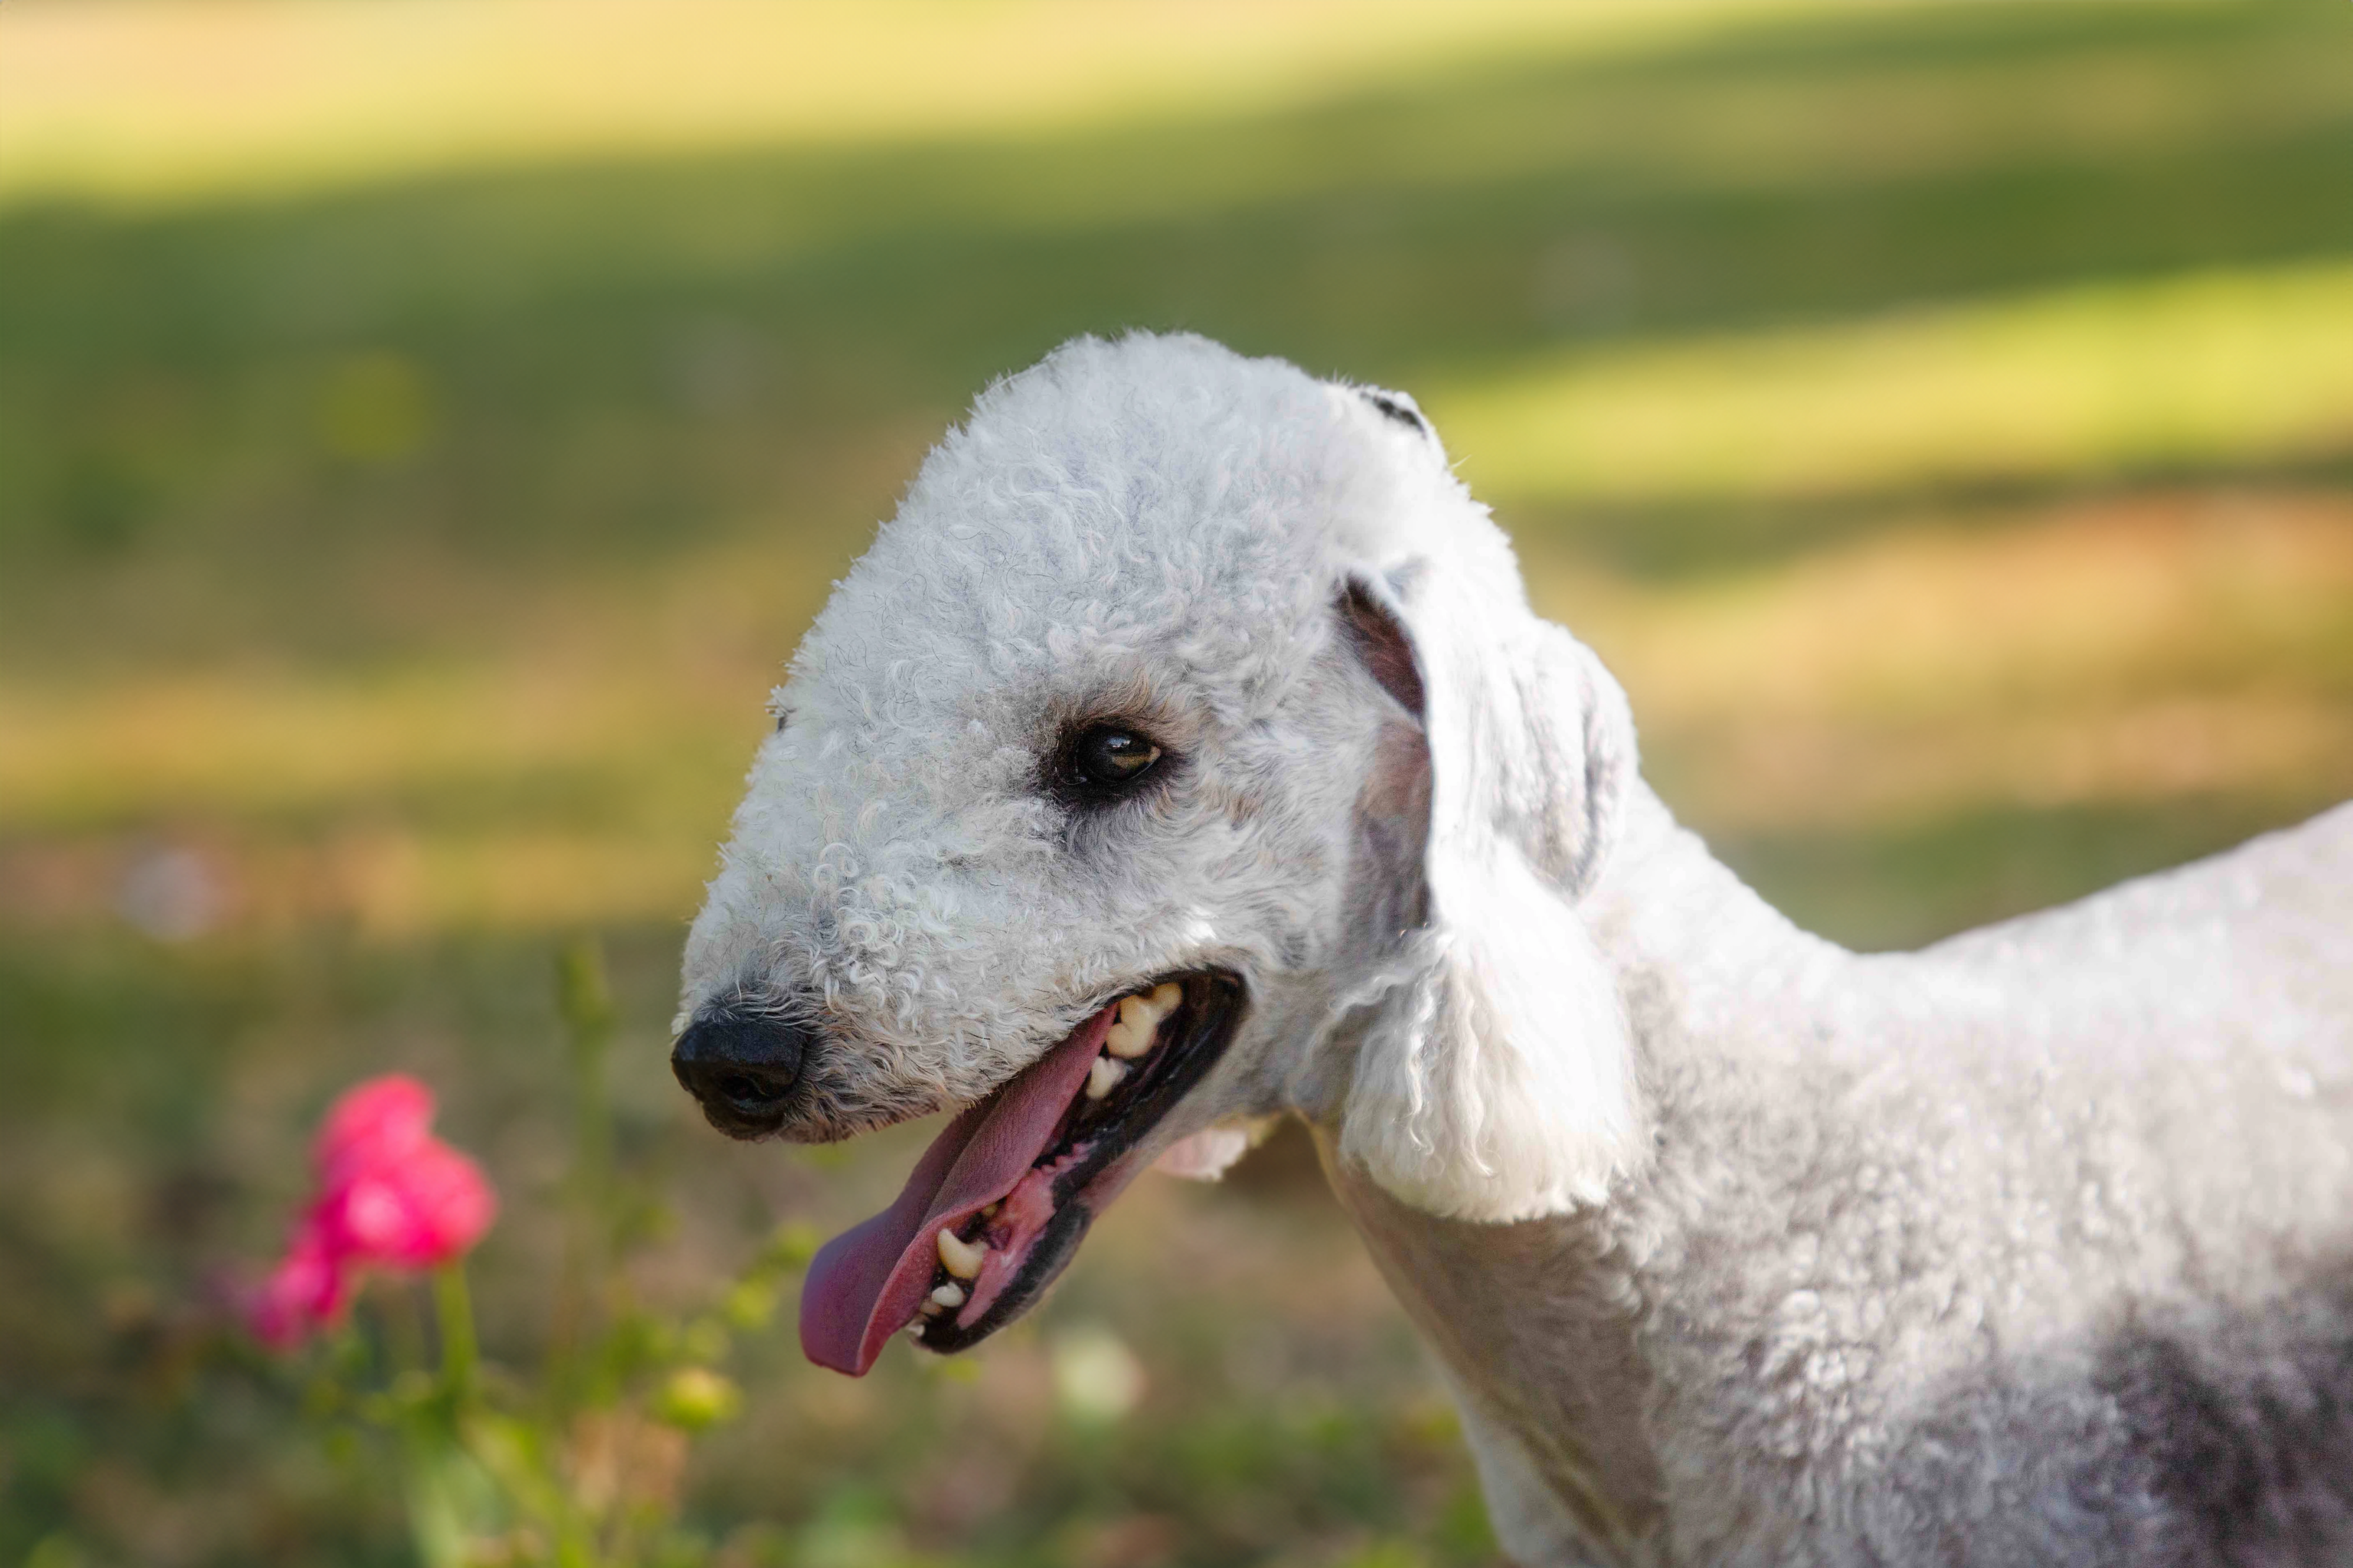 The Bedlington Terrier enjoying being in the park on a sunny day